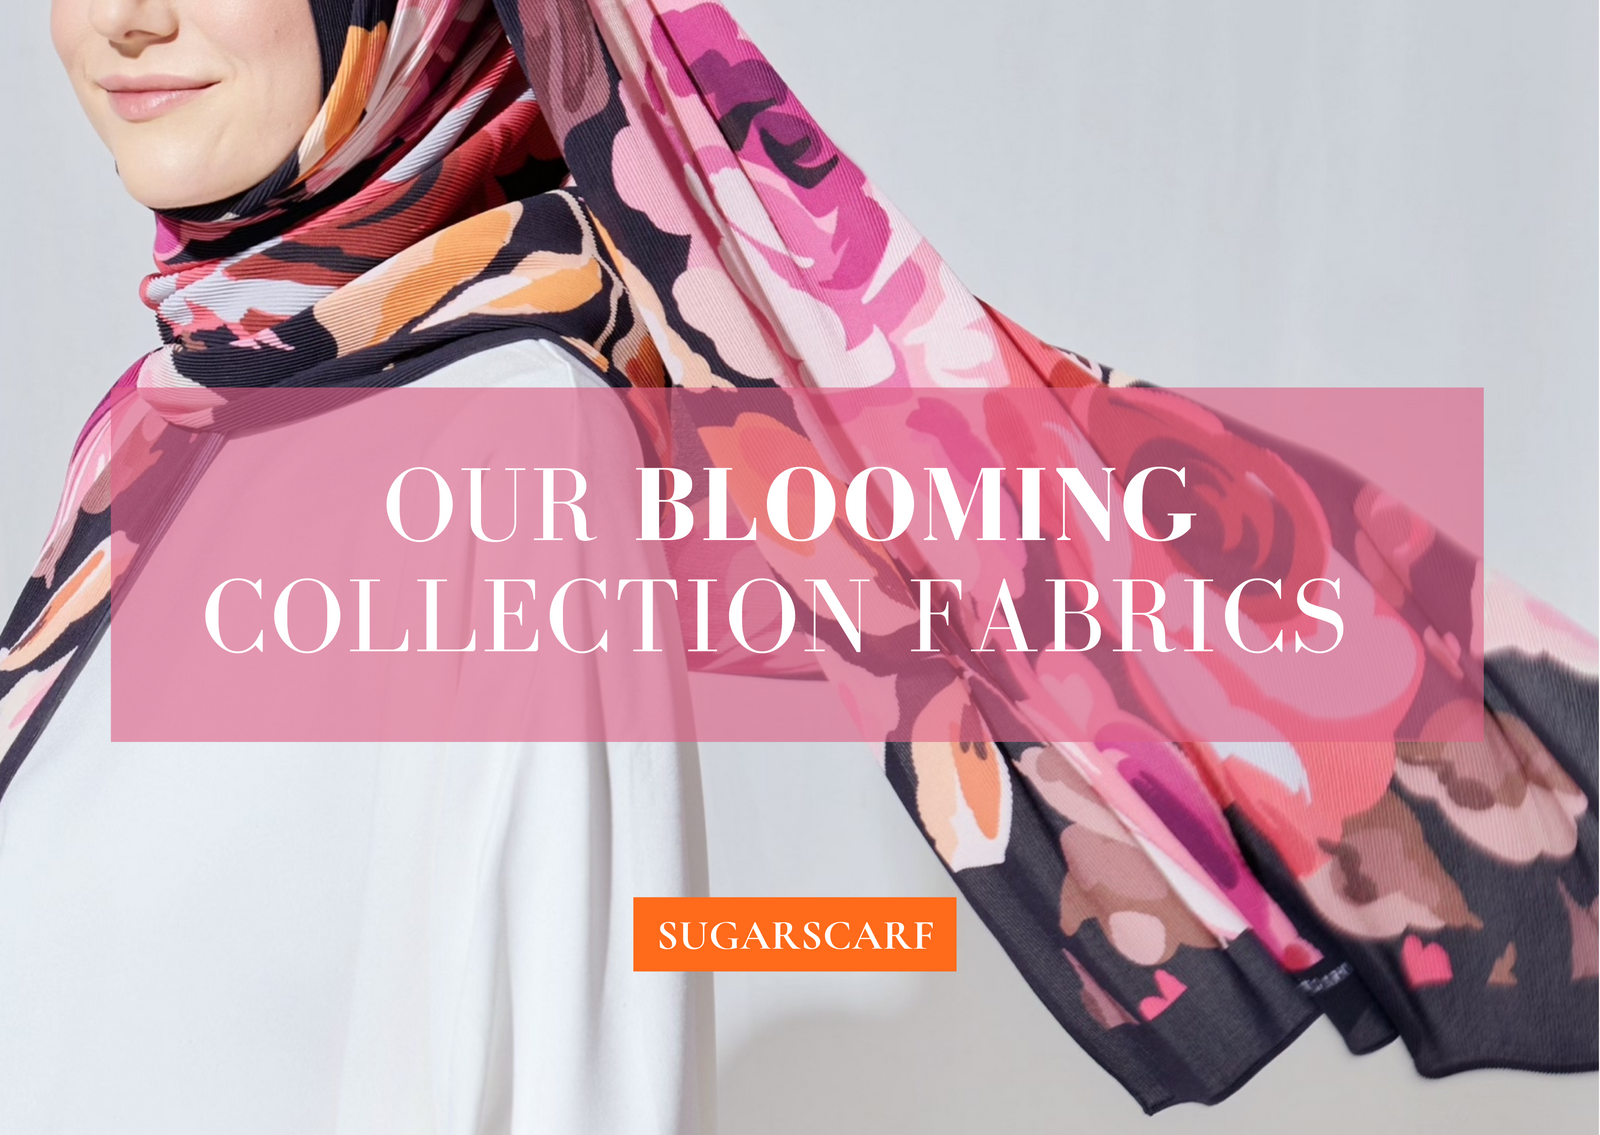 Our Blooming Collection Fabrics ; When to wear em’, How to care for em’!